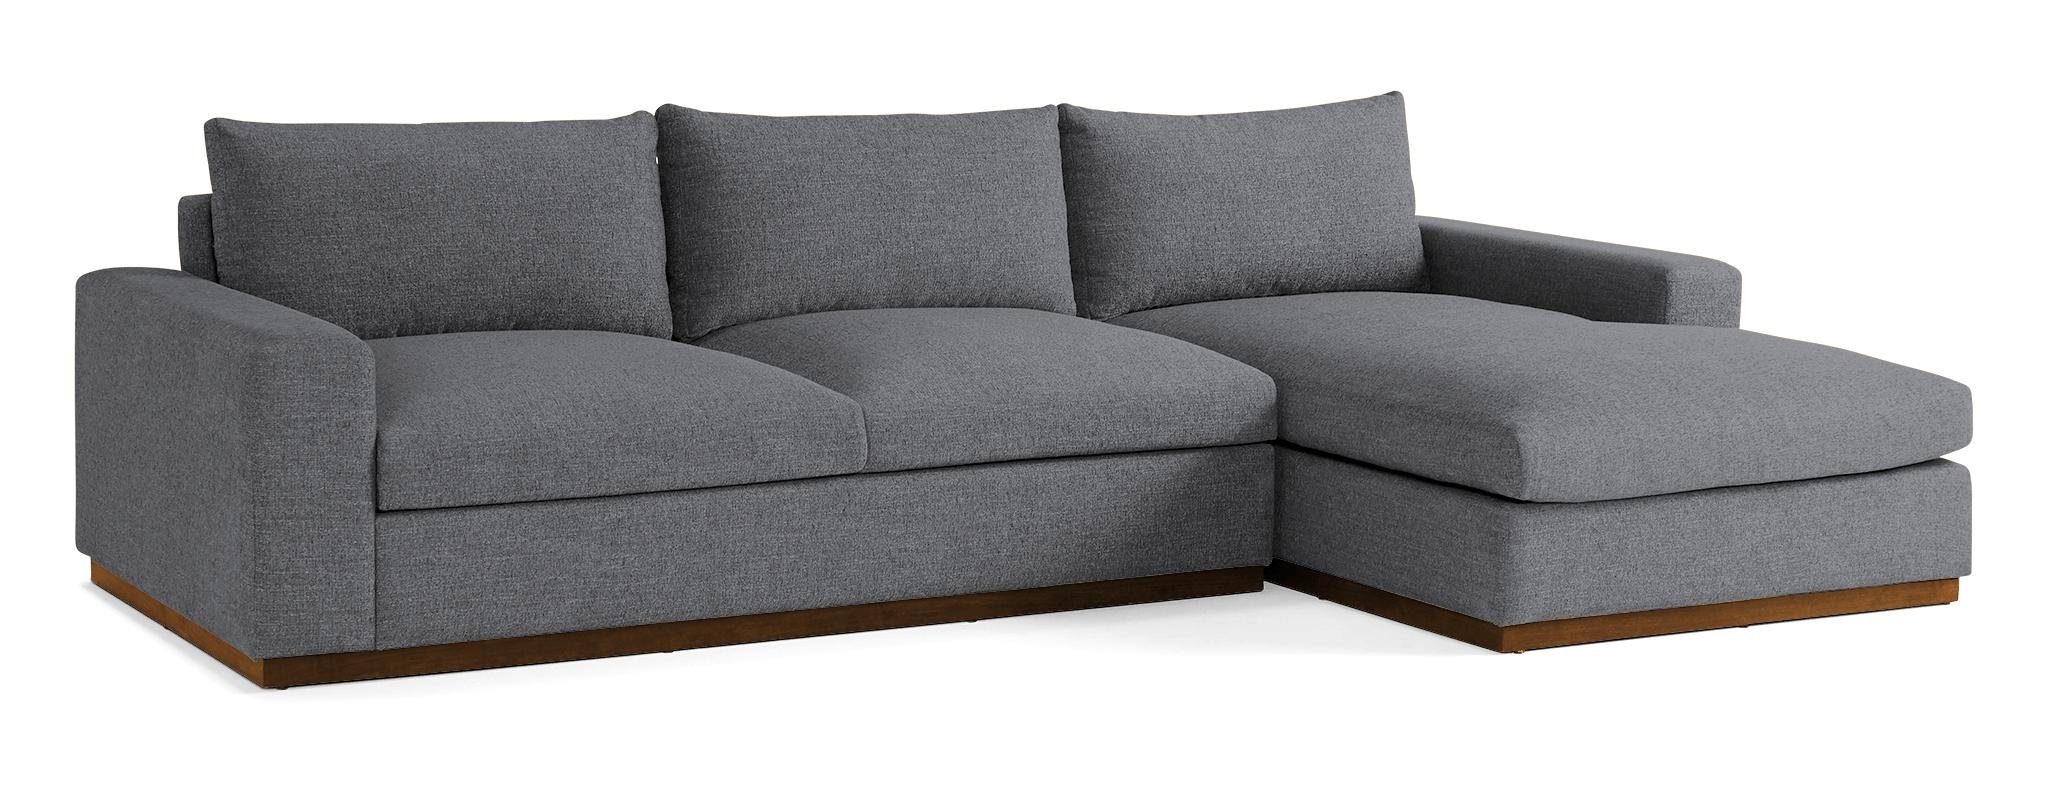 Gray Holt Mid Century Modern Sectional with Storage - Essence Ash - Mocha - Right - Image 1